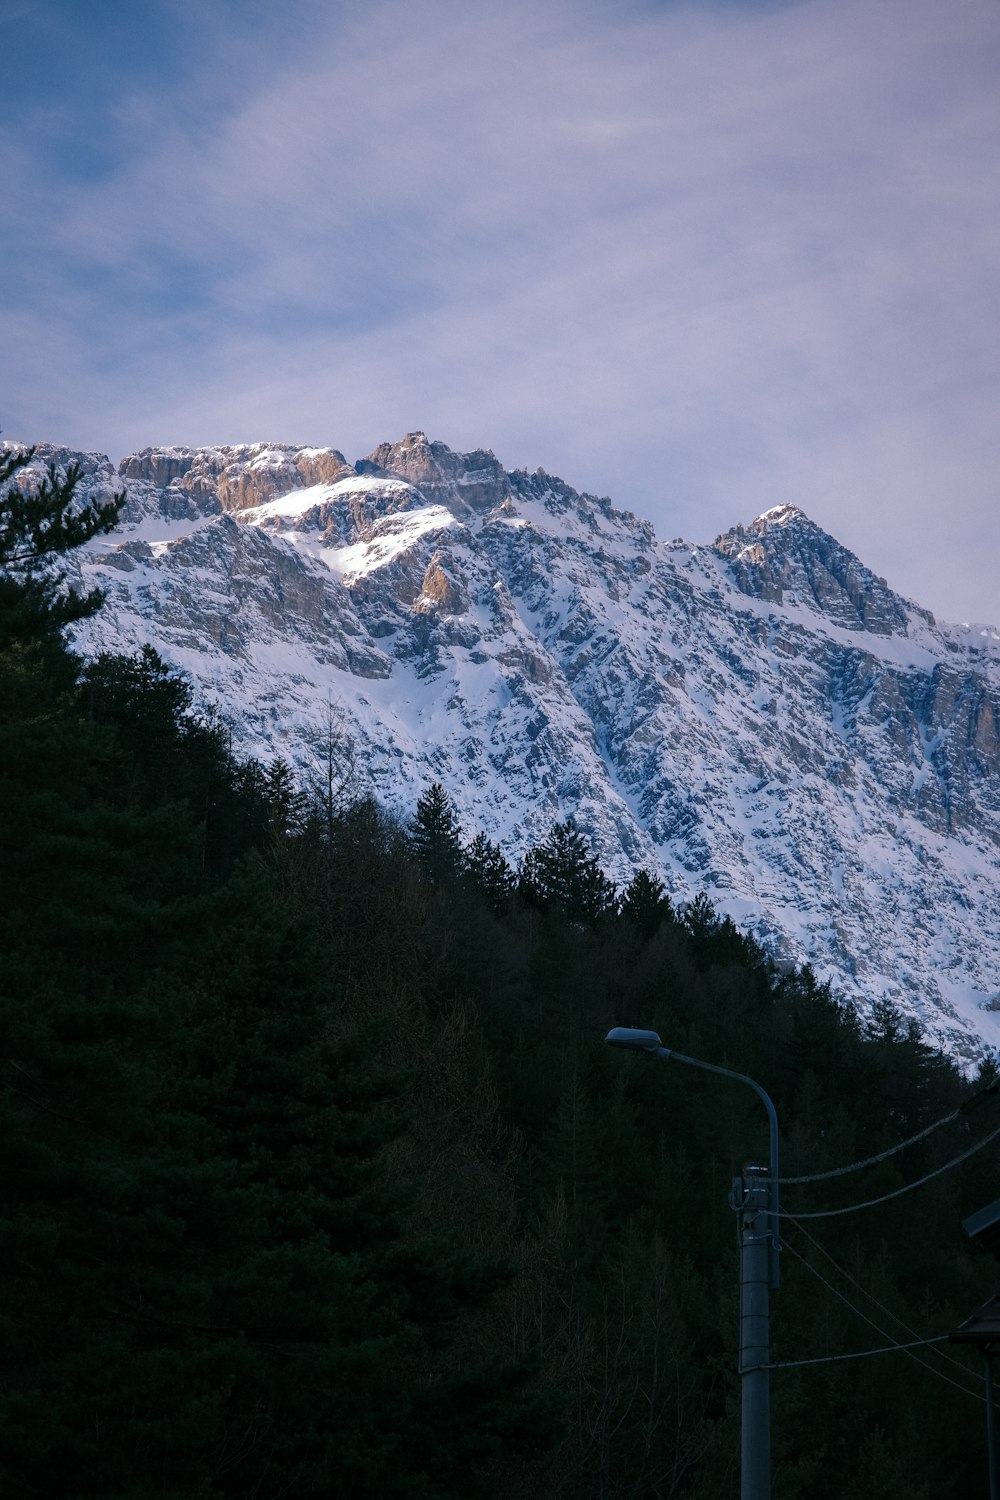 a snow covered mountain with a street light in the foreground